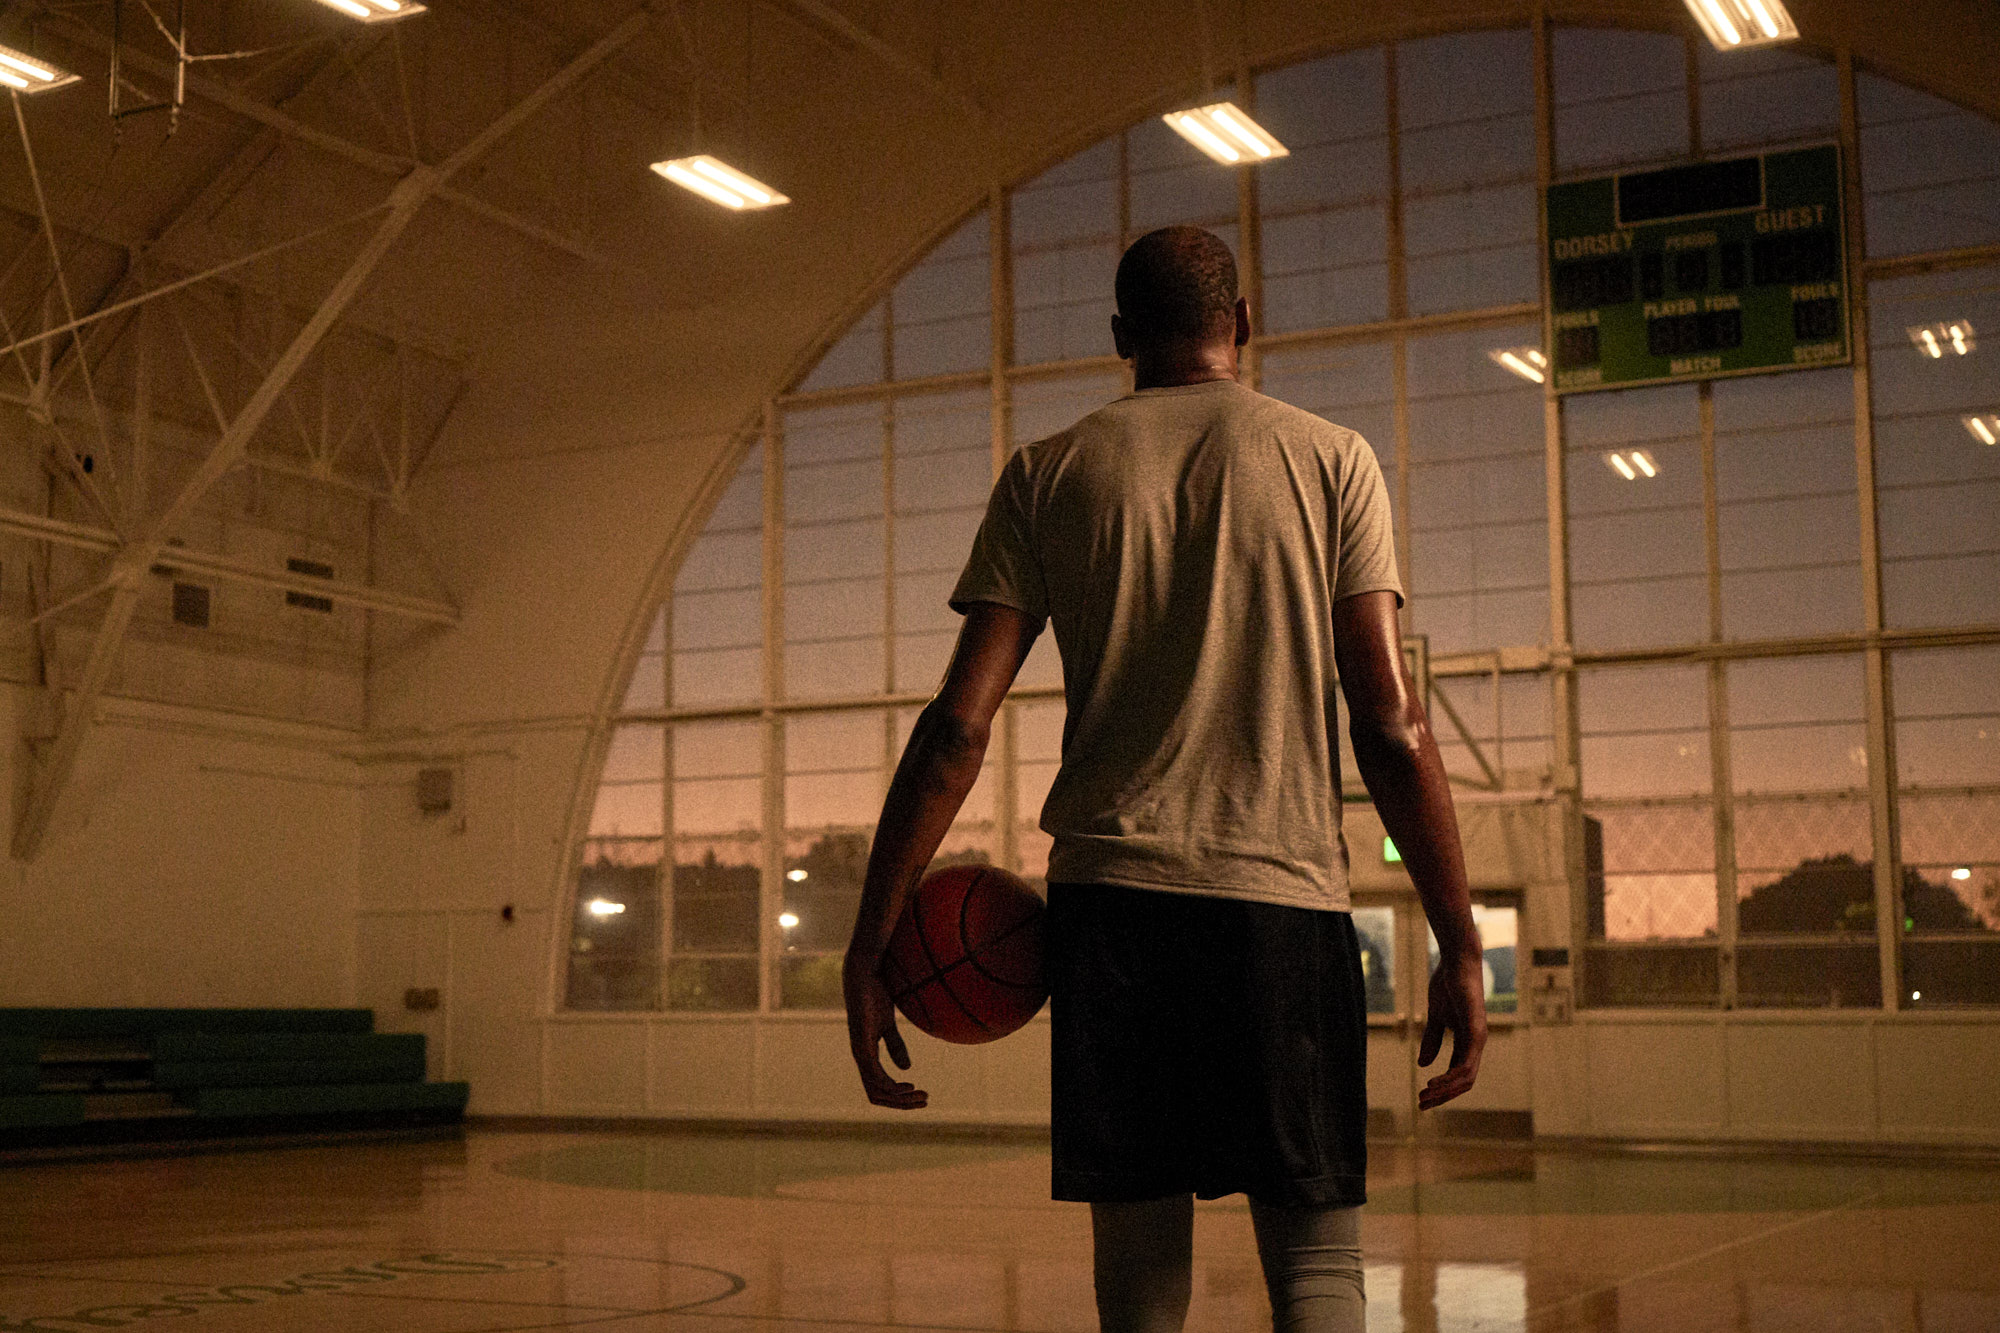 Commercial advertising photoshoot with celebrity athlete Kevin Durant for a national campaign.